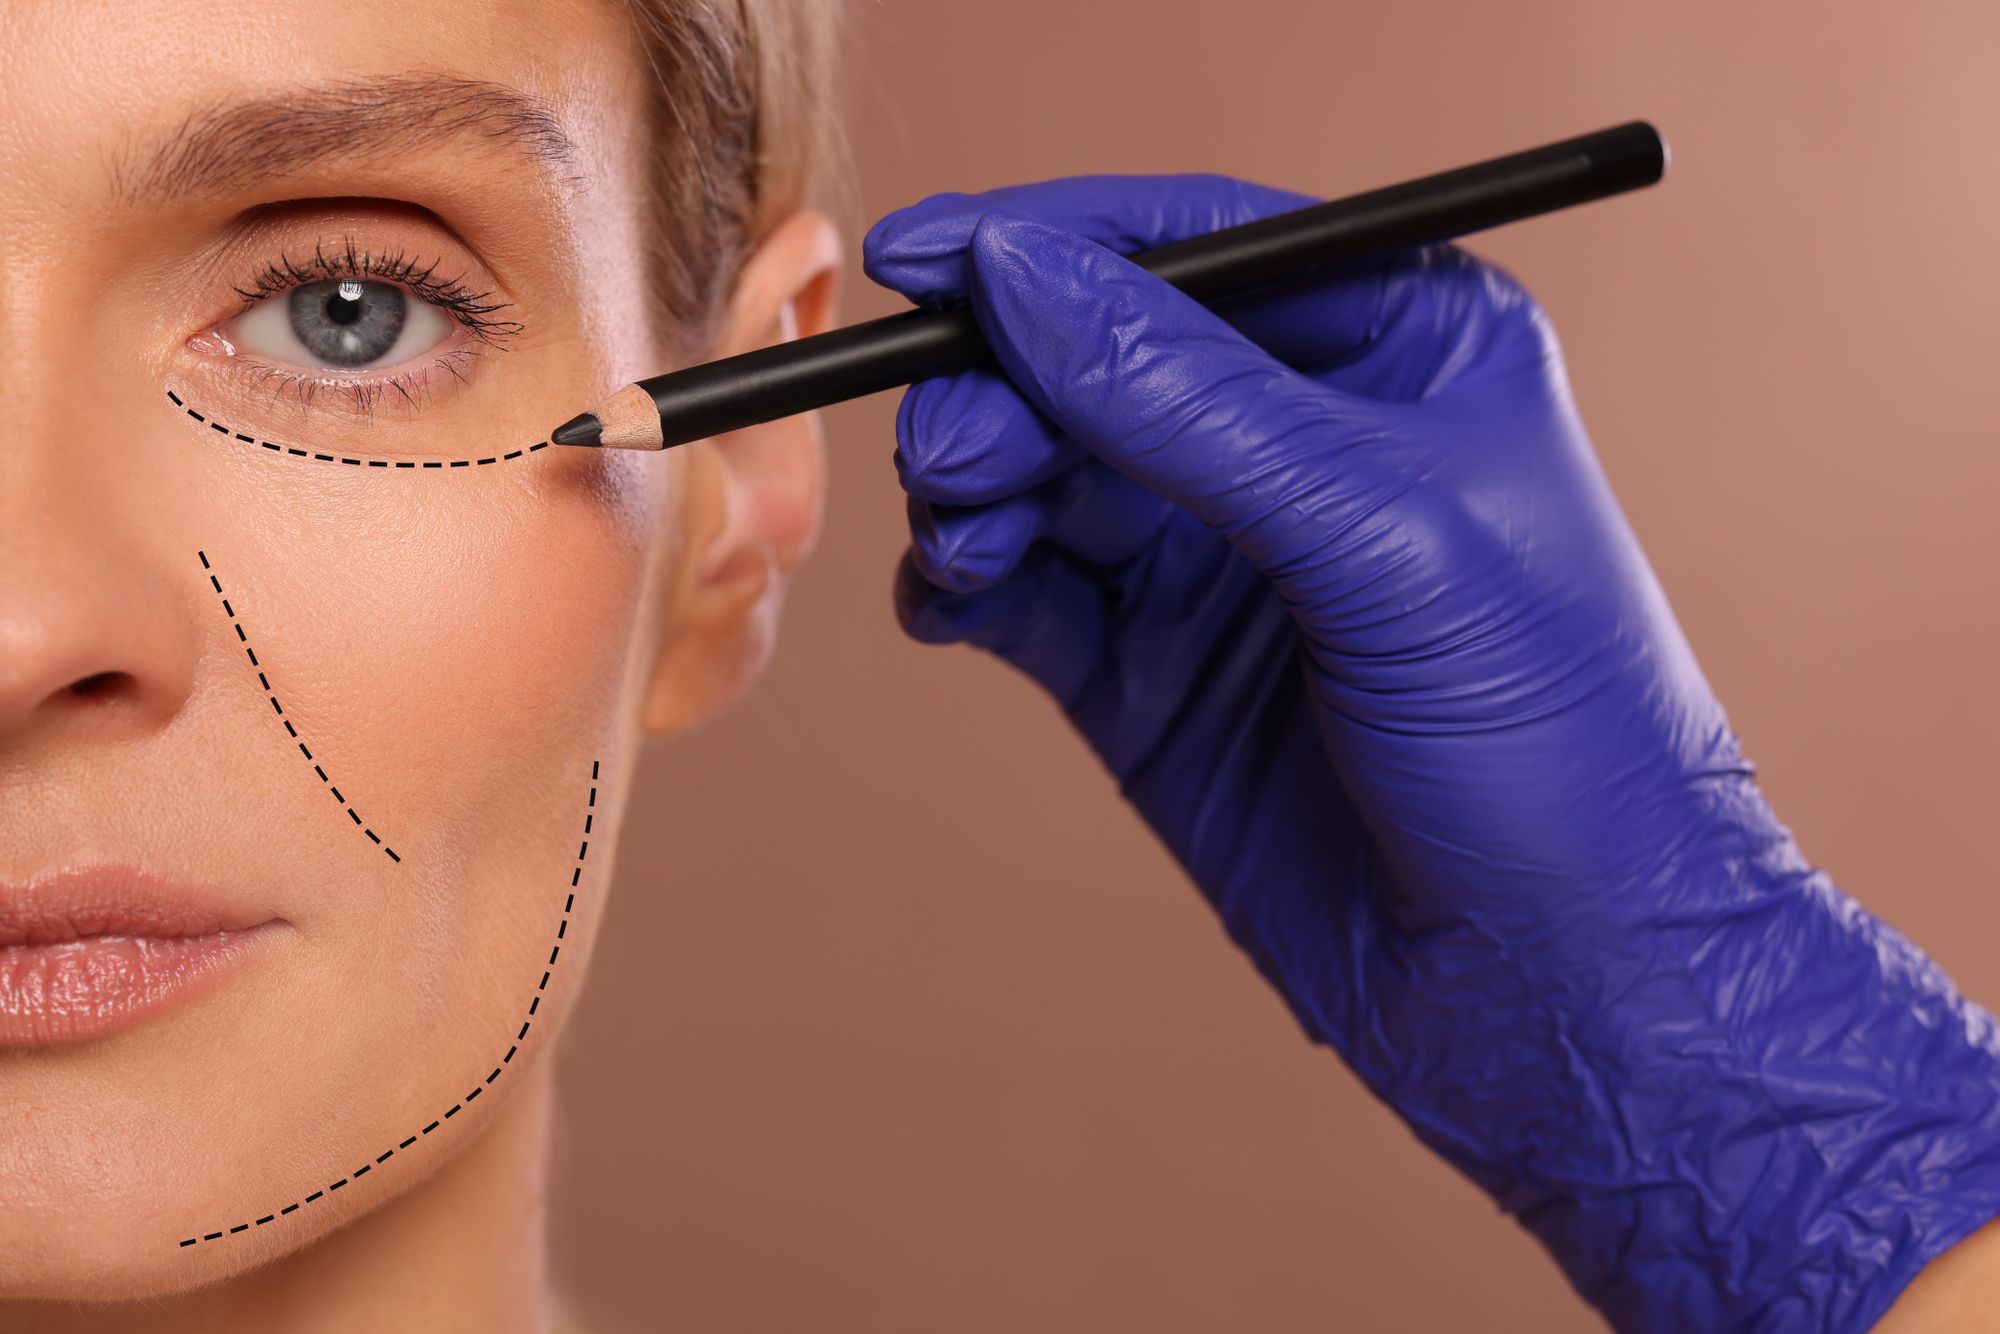 Physician Professional Liability Insurance in Plastic Surgery